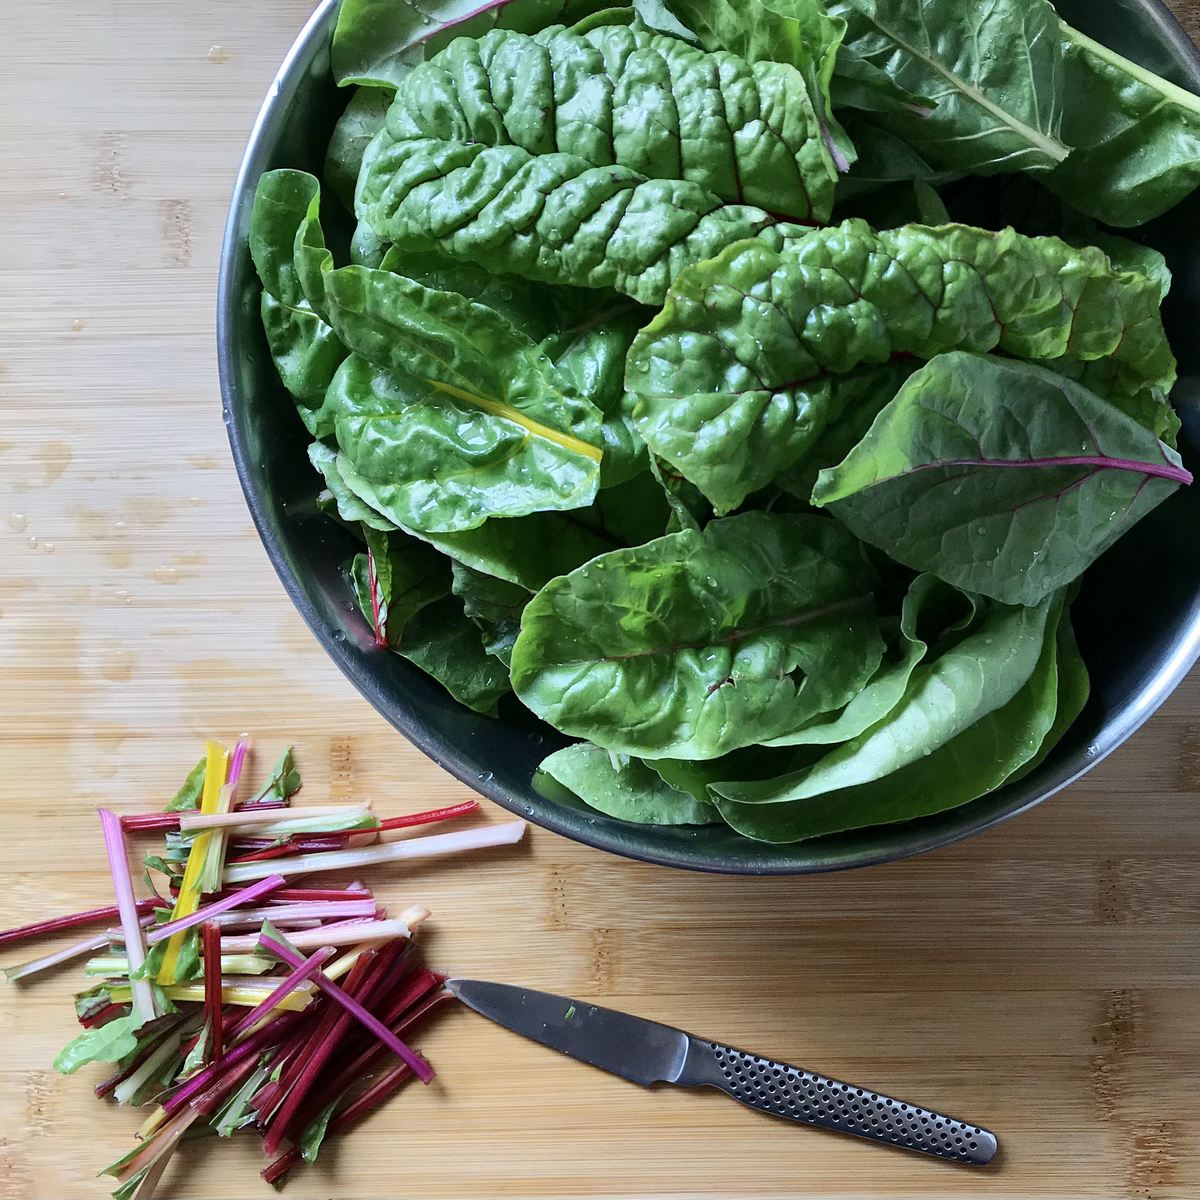 The stalks and chard leaves are separated prior to blanching.